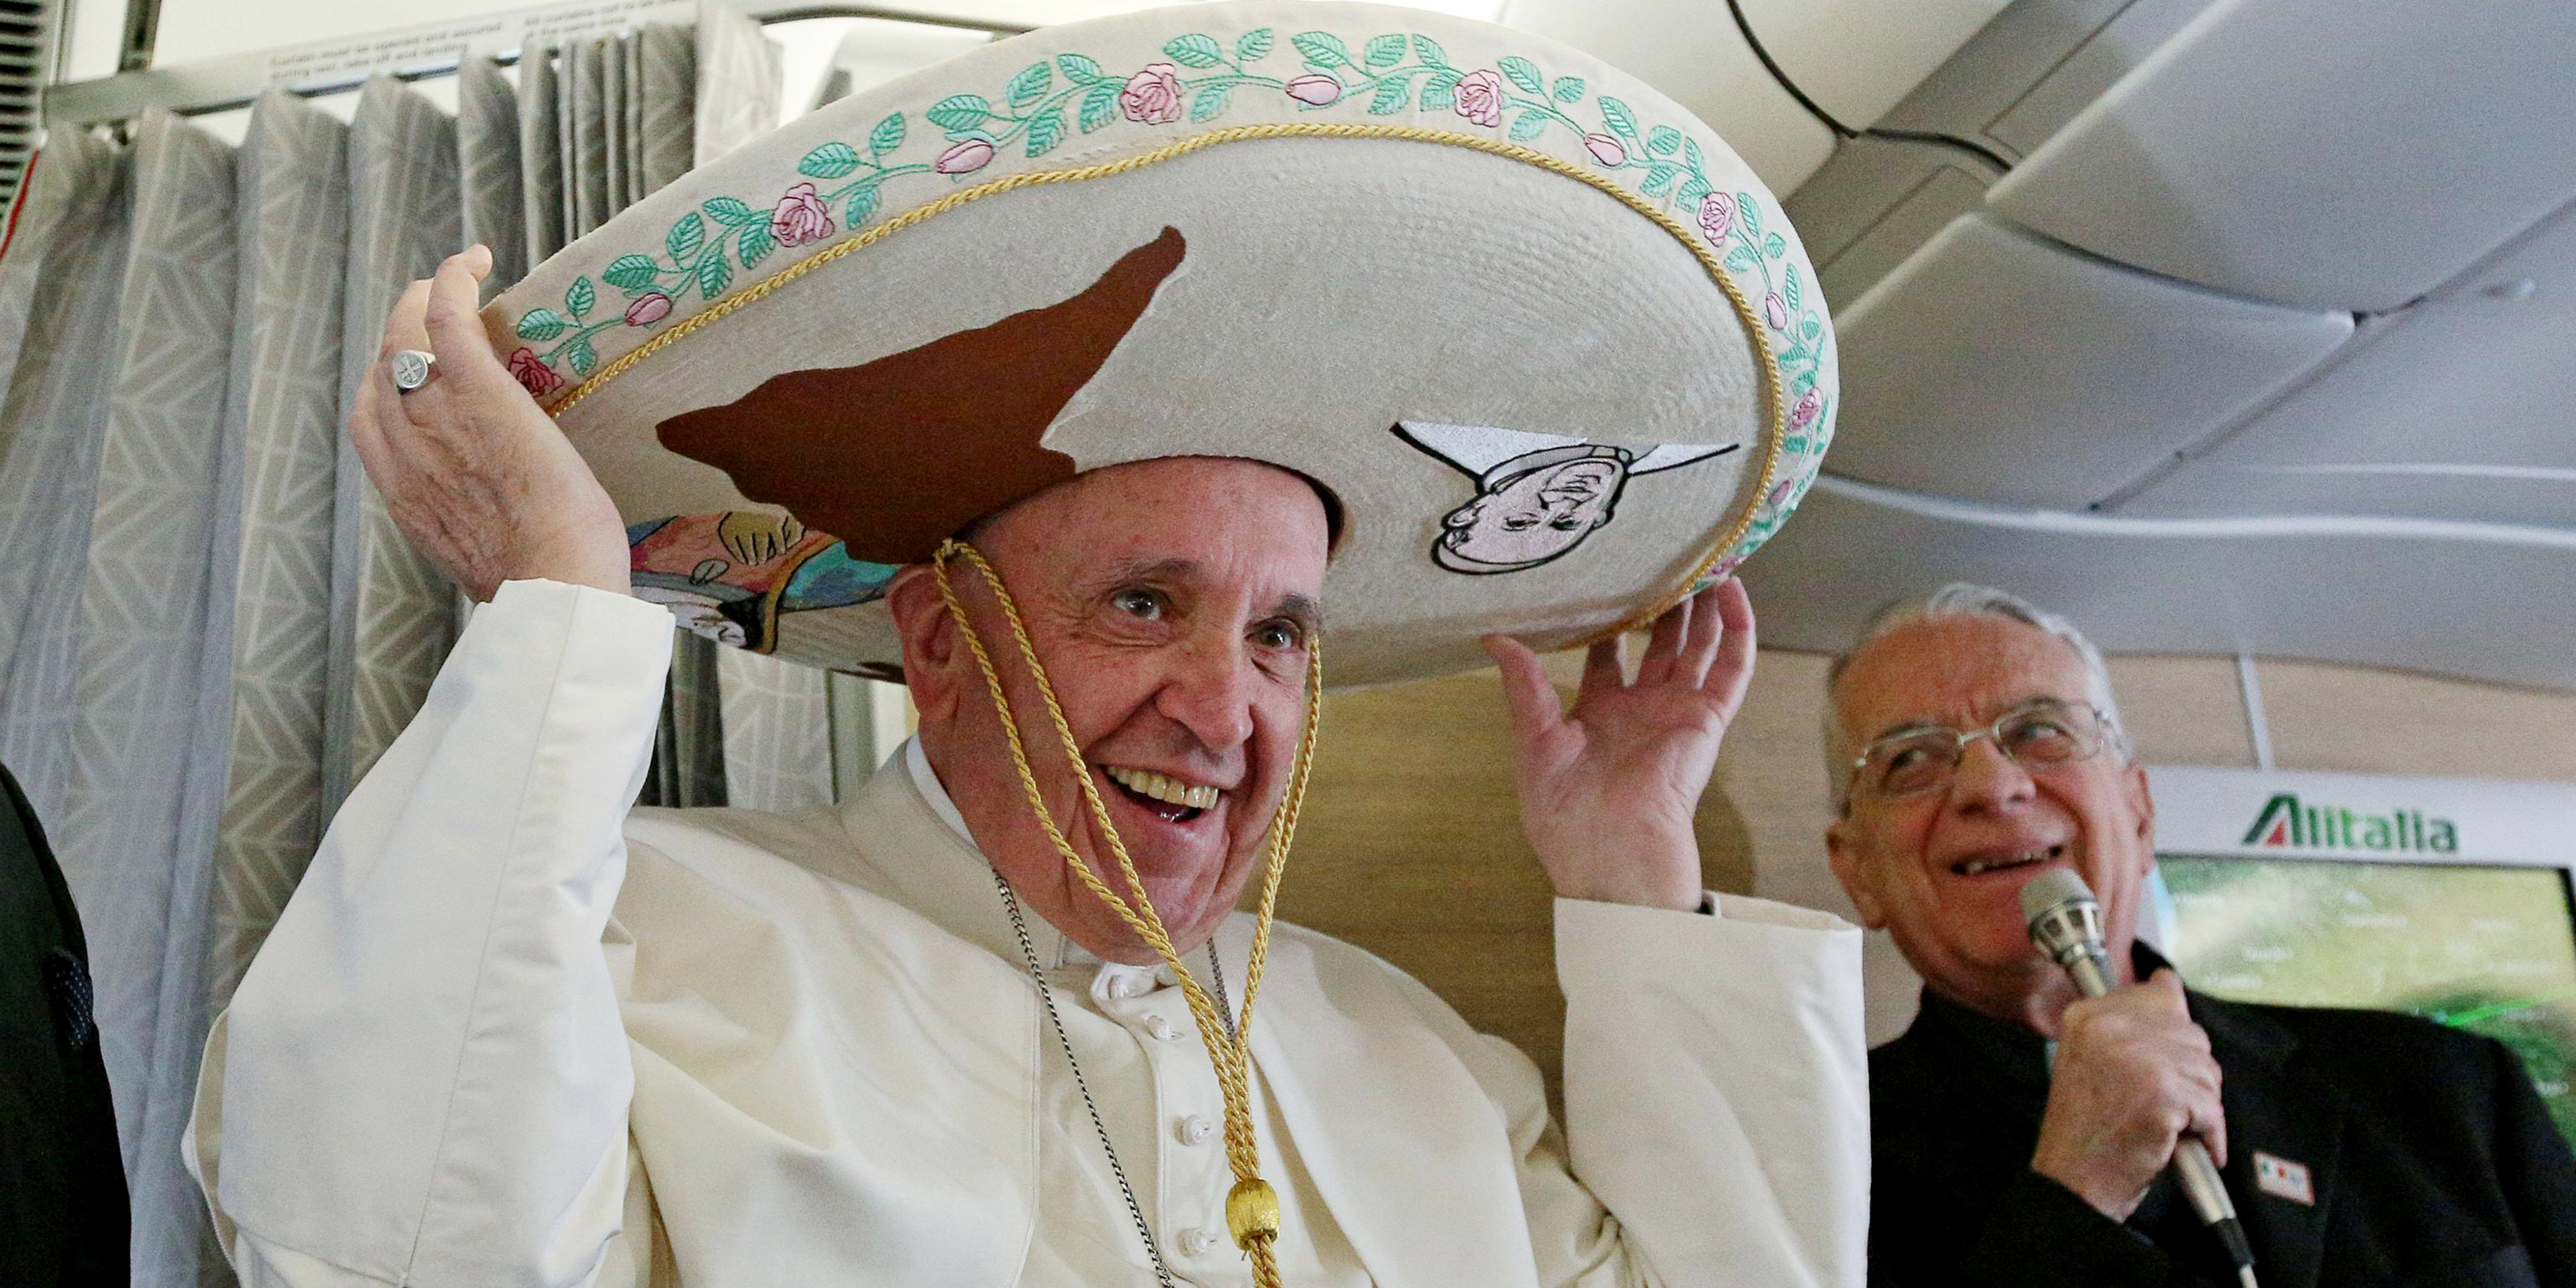 POPE MEXICO